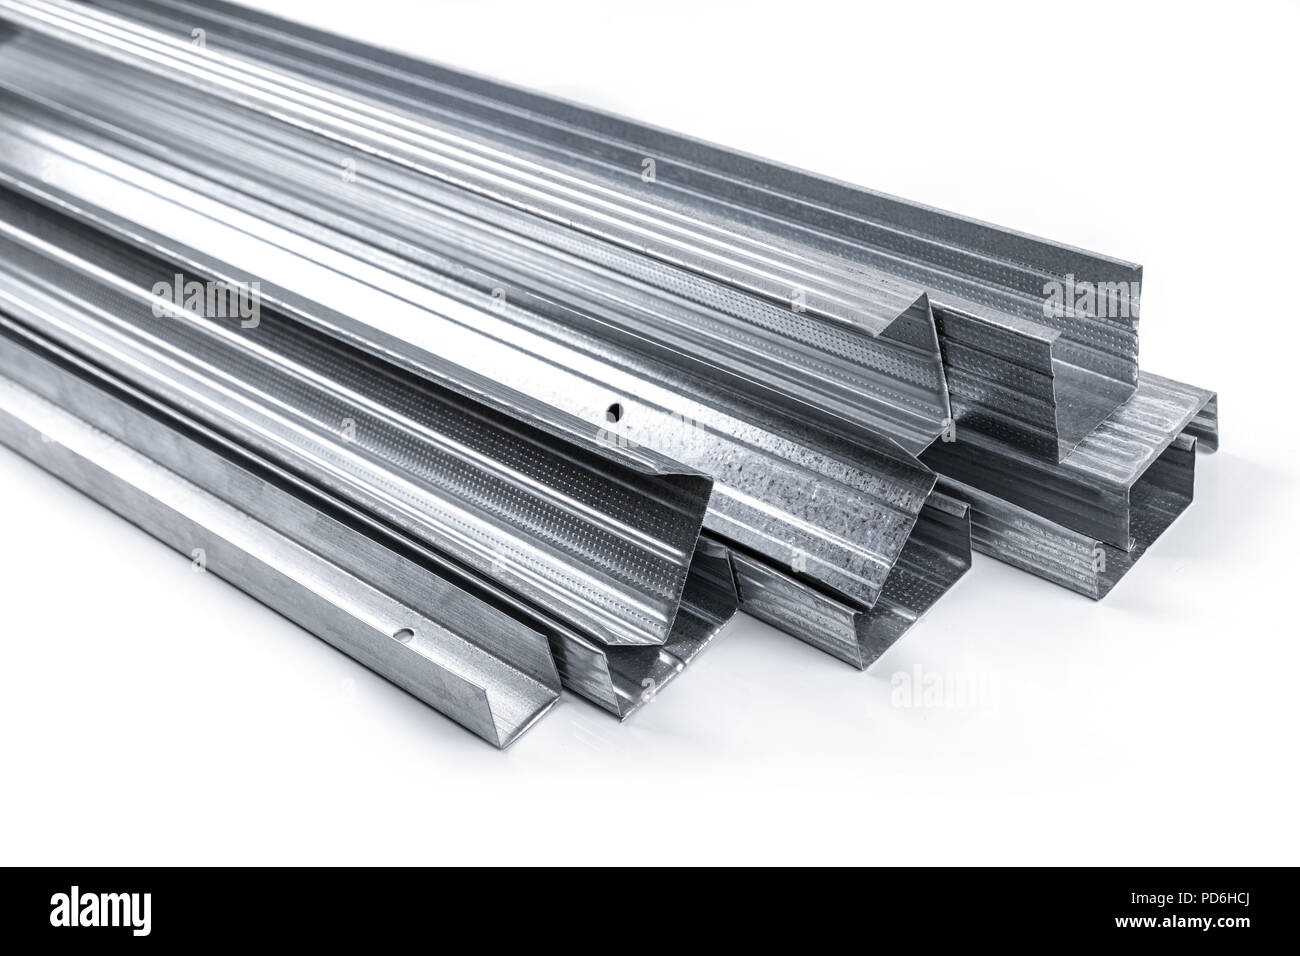 drywall metal profiles isolated on white background Stock Photo